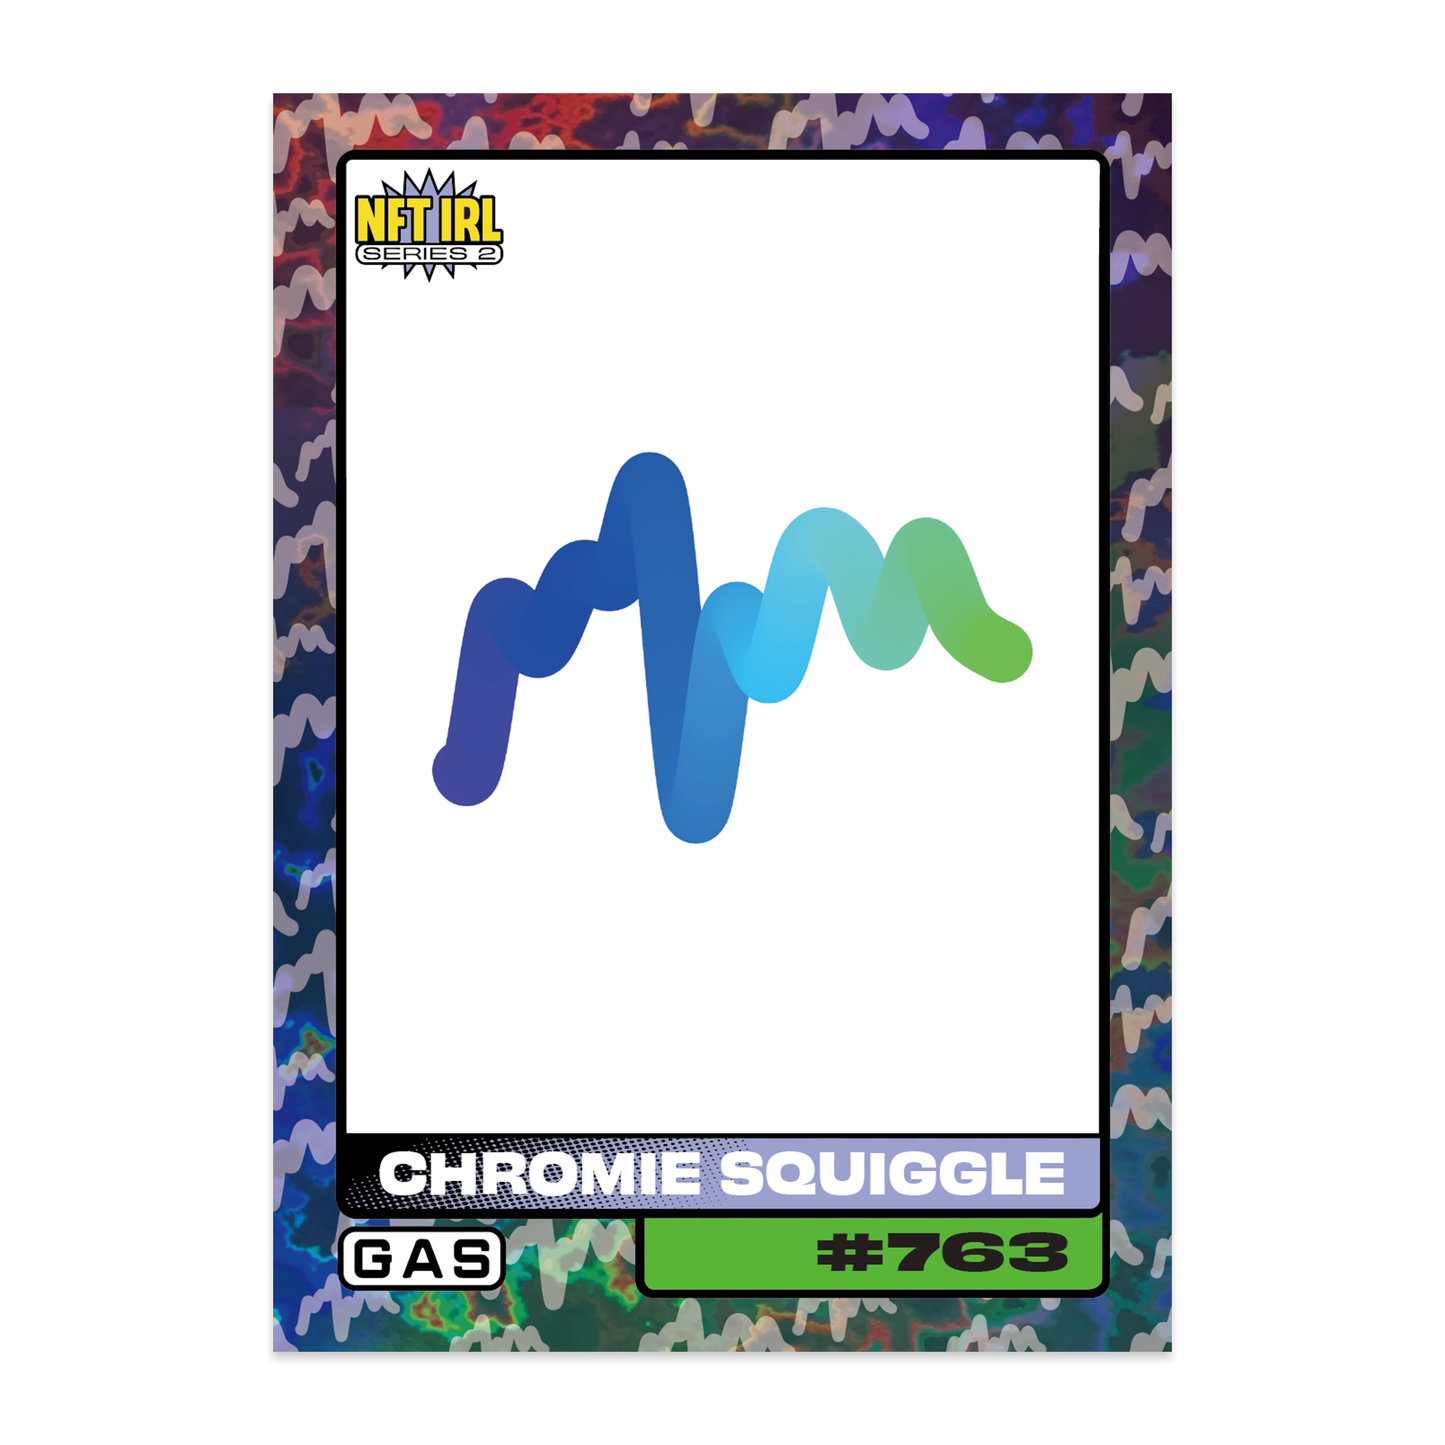 GAS NFT IRL Series 2 #20 Chromie Squiggle #763 Limited Edition Magma Foil Card